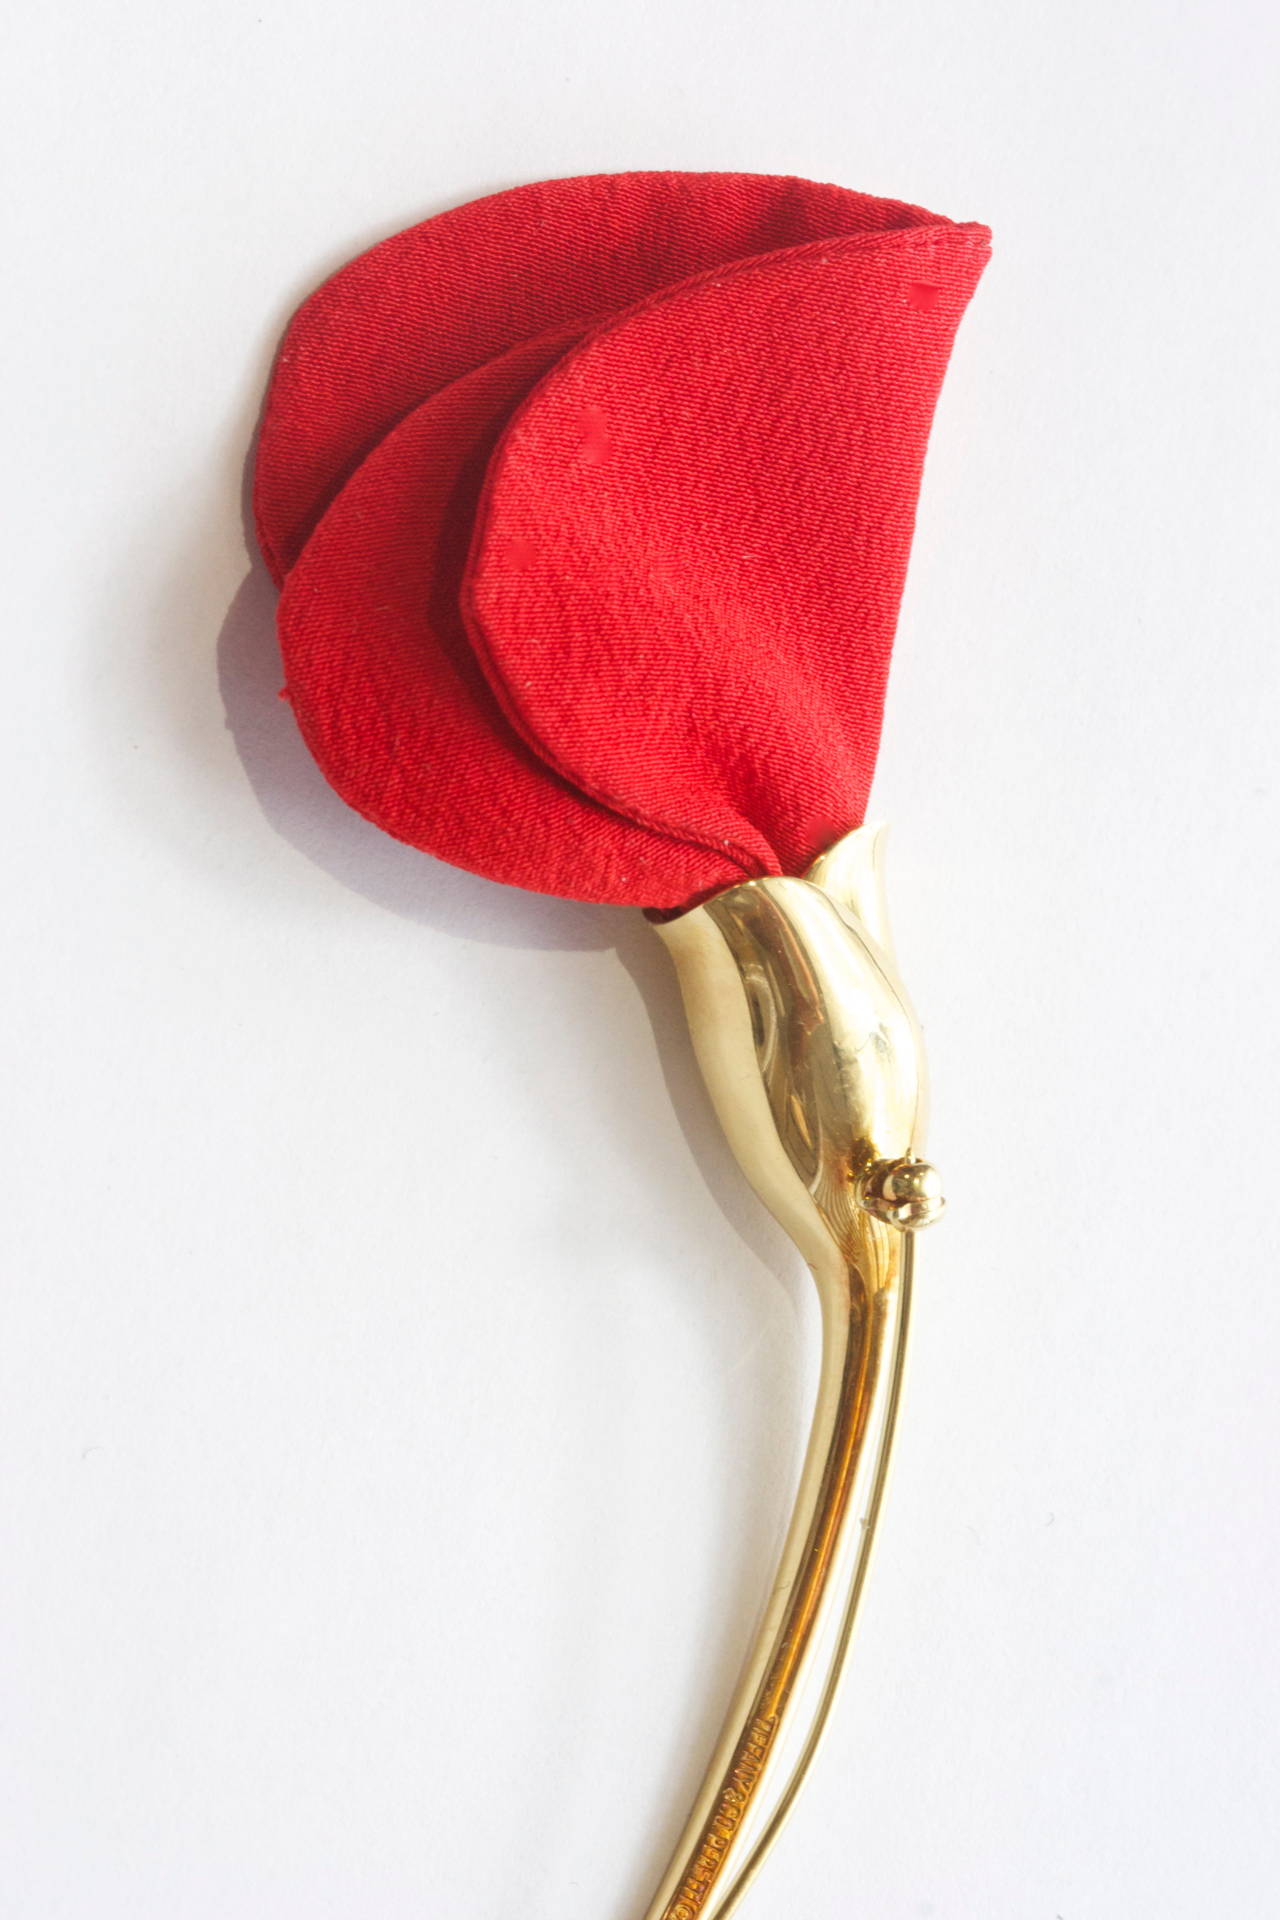 The rose brooch is designed by Peretti. The stem is crafted in 18k yellow gold and the petals are durable but soft smooth red cloth. May also be worn on a jacket lapel for men or women.